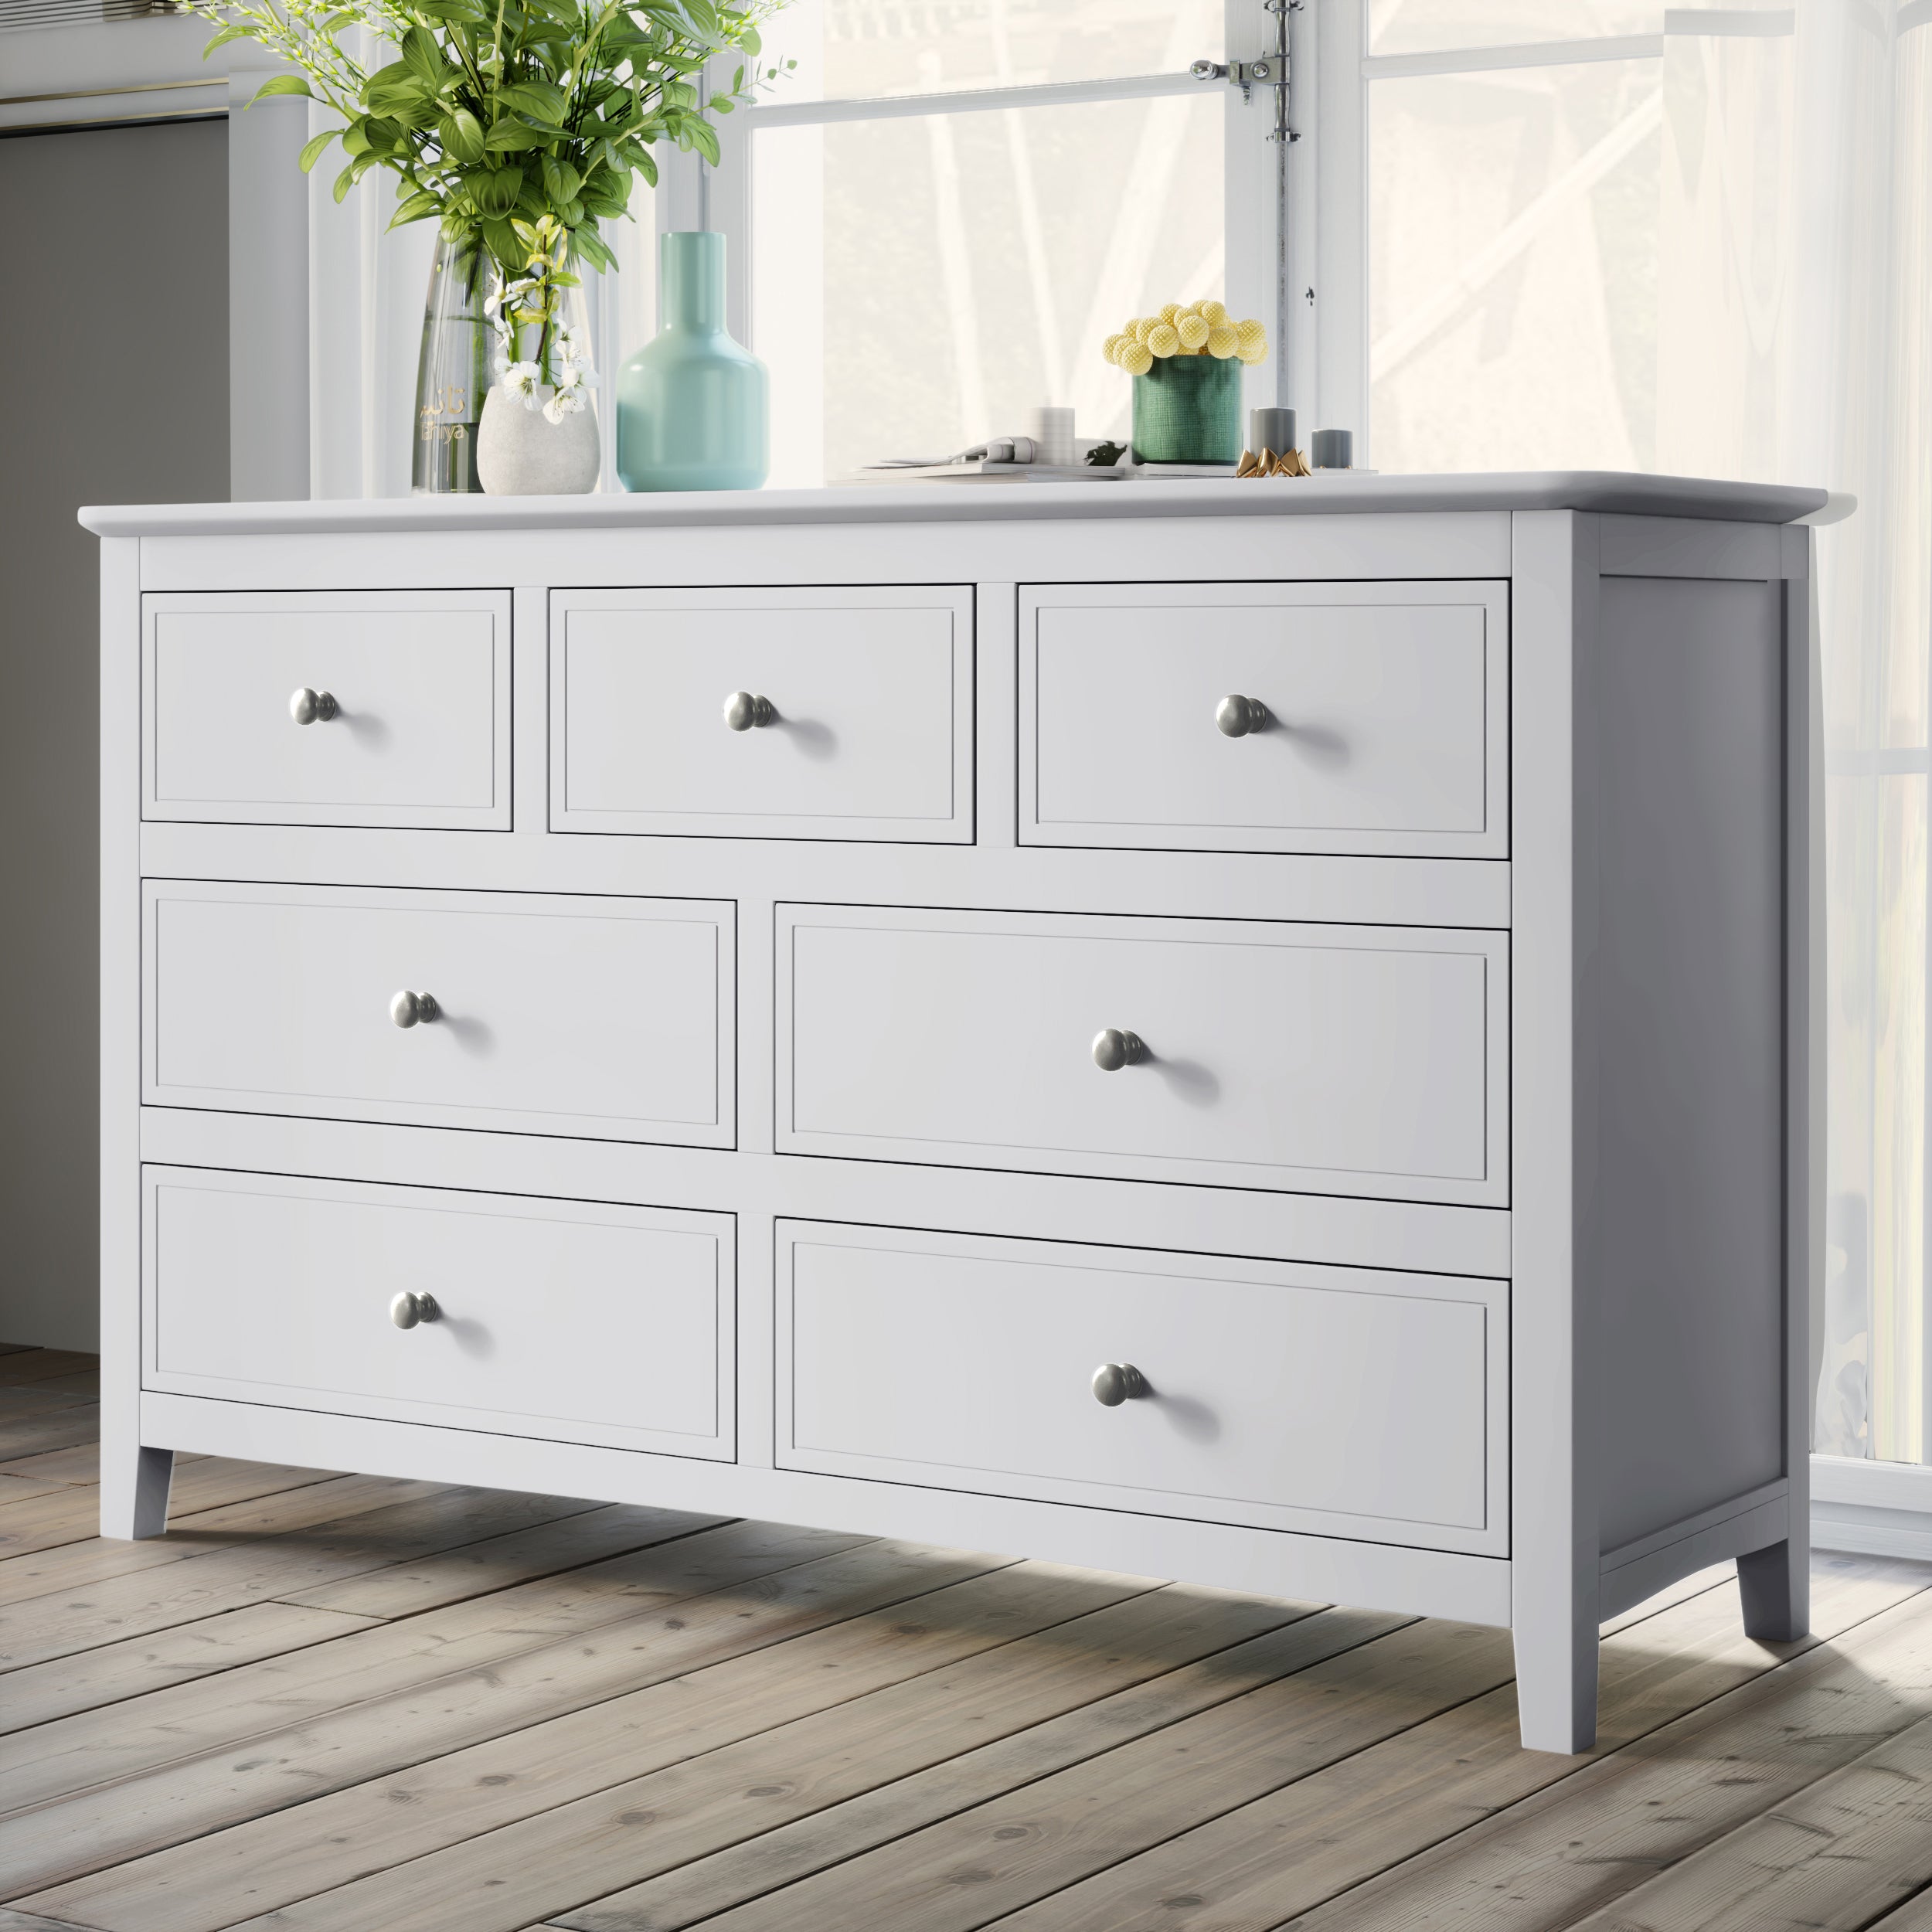 7 Drawers Solid Wood Dresser in (White)